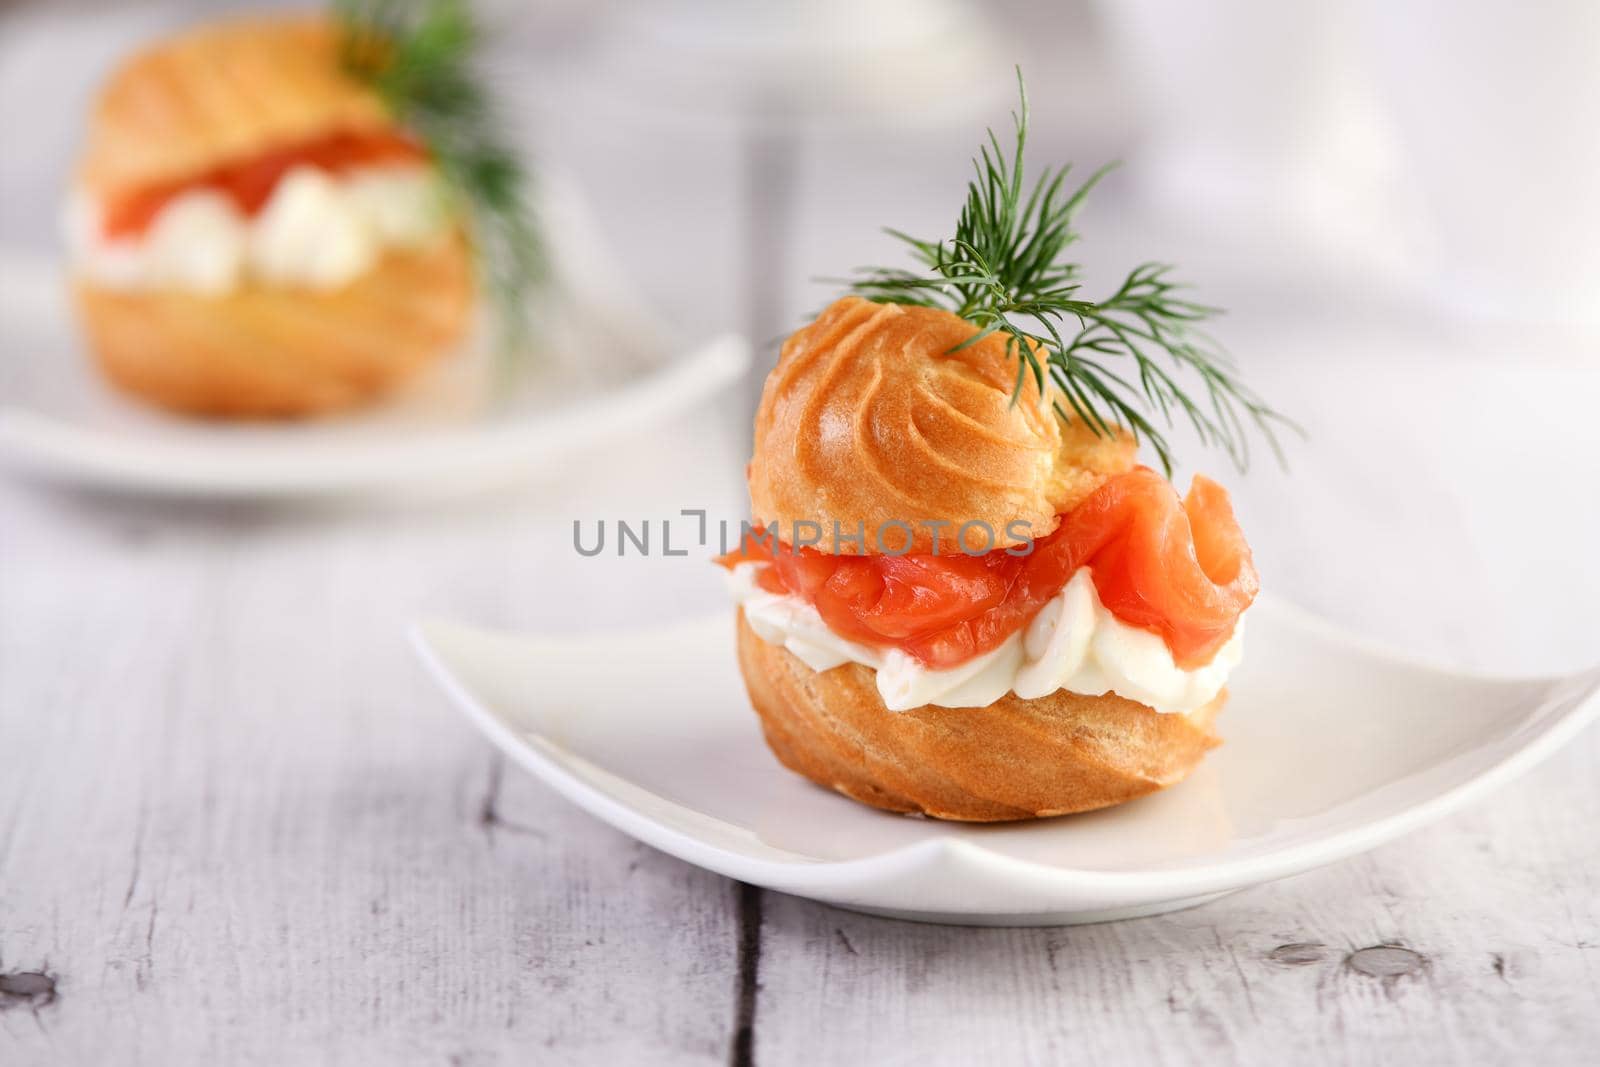 Profiteroles stuffed with cream cheese and salmon, decorated with a sprig of dill. Close-up 